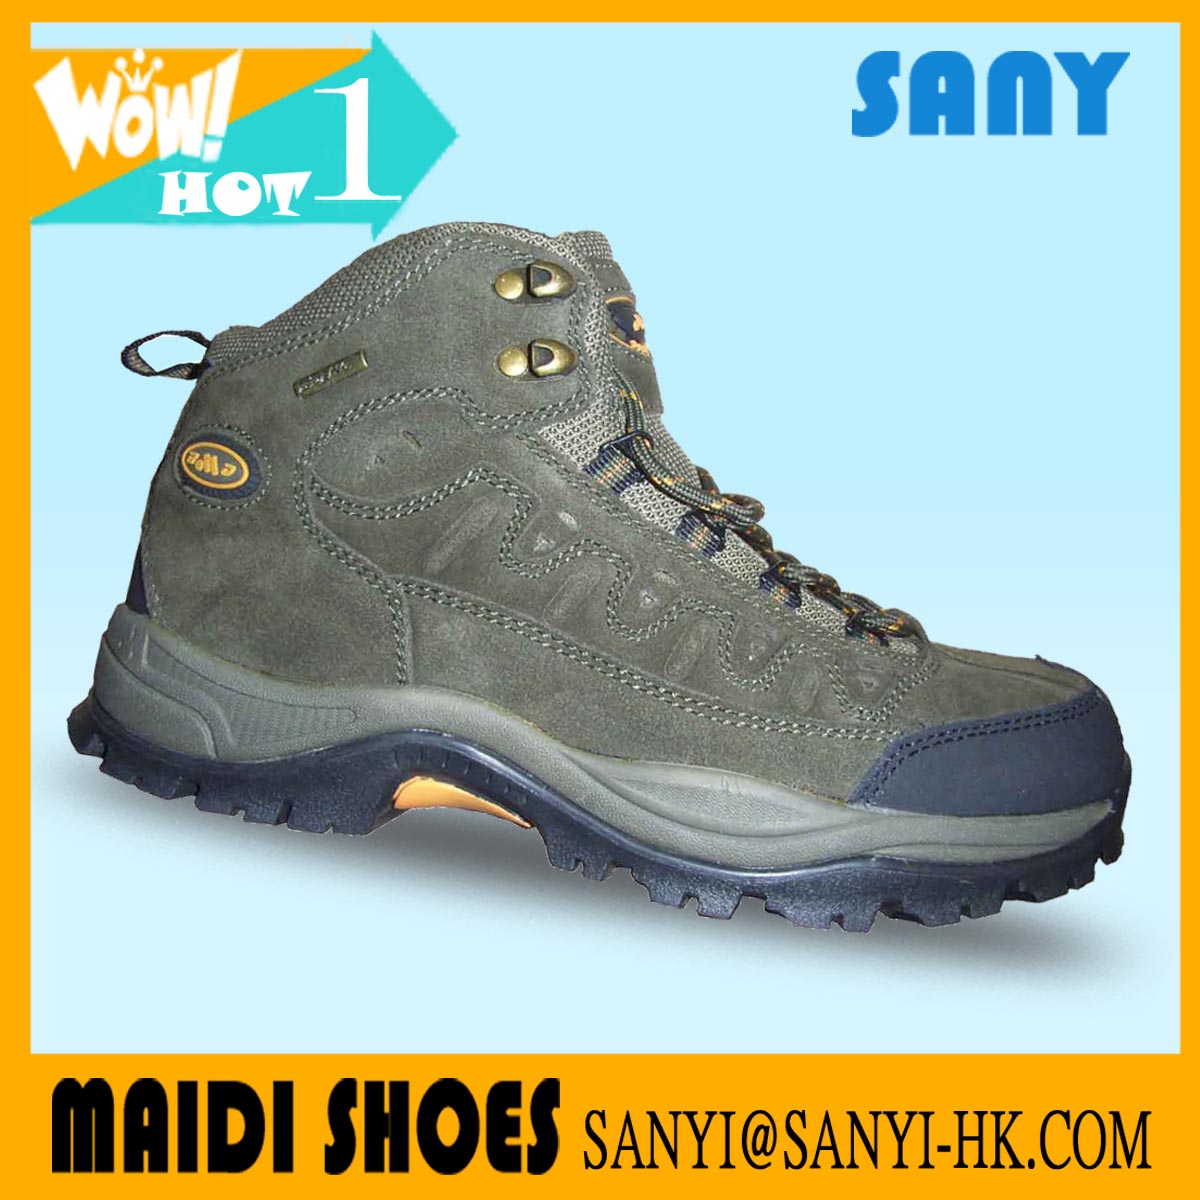 Hot sale custom rock climbing shoes,New designed hiking outdoor shoes, climbing safety shoes